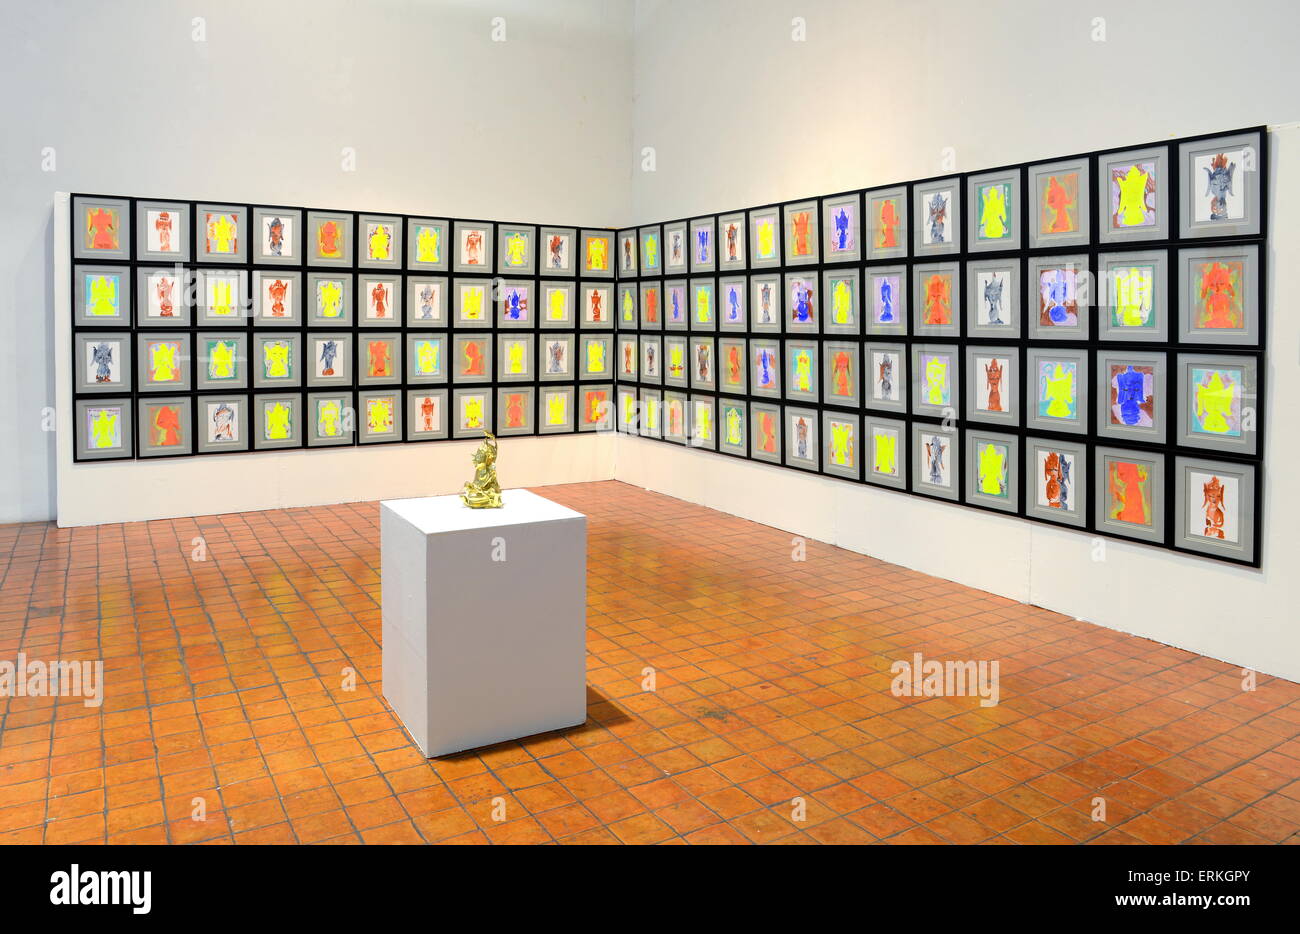 BANGKOK - MARCH 7: Thai Contemporary Art Exhibition on March 7, 2015 at The National Gallery in Bangkok, Thailand. Stock Photo